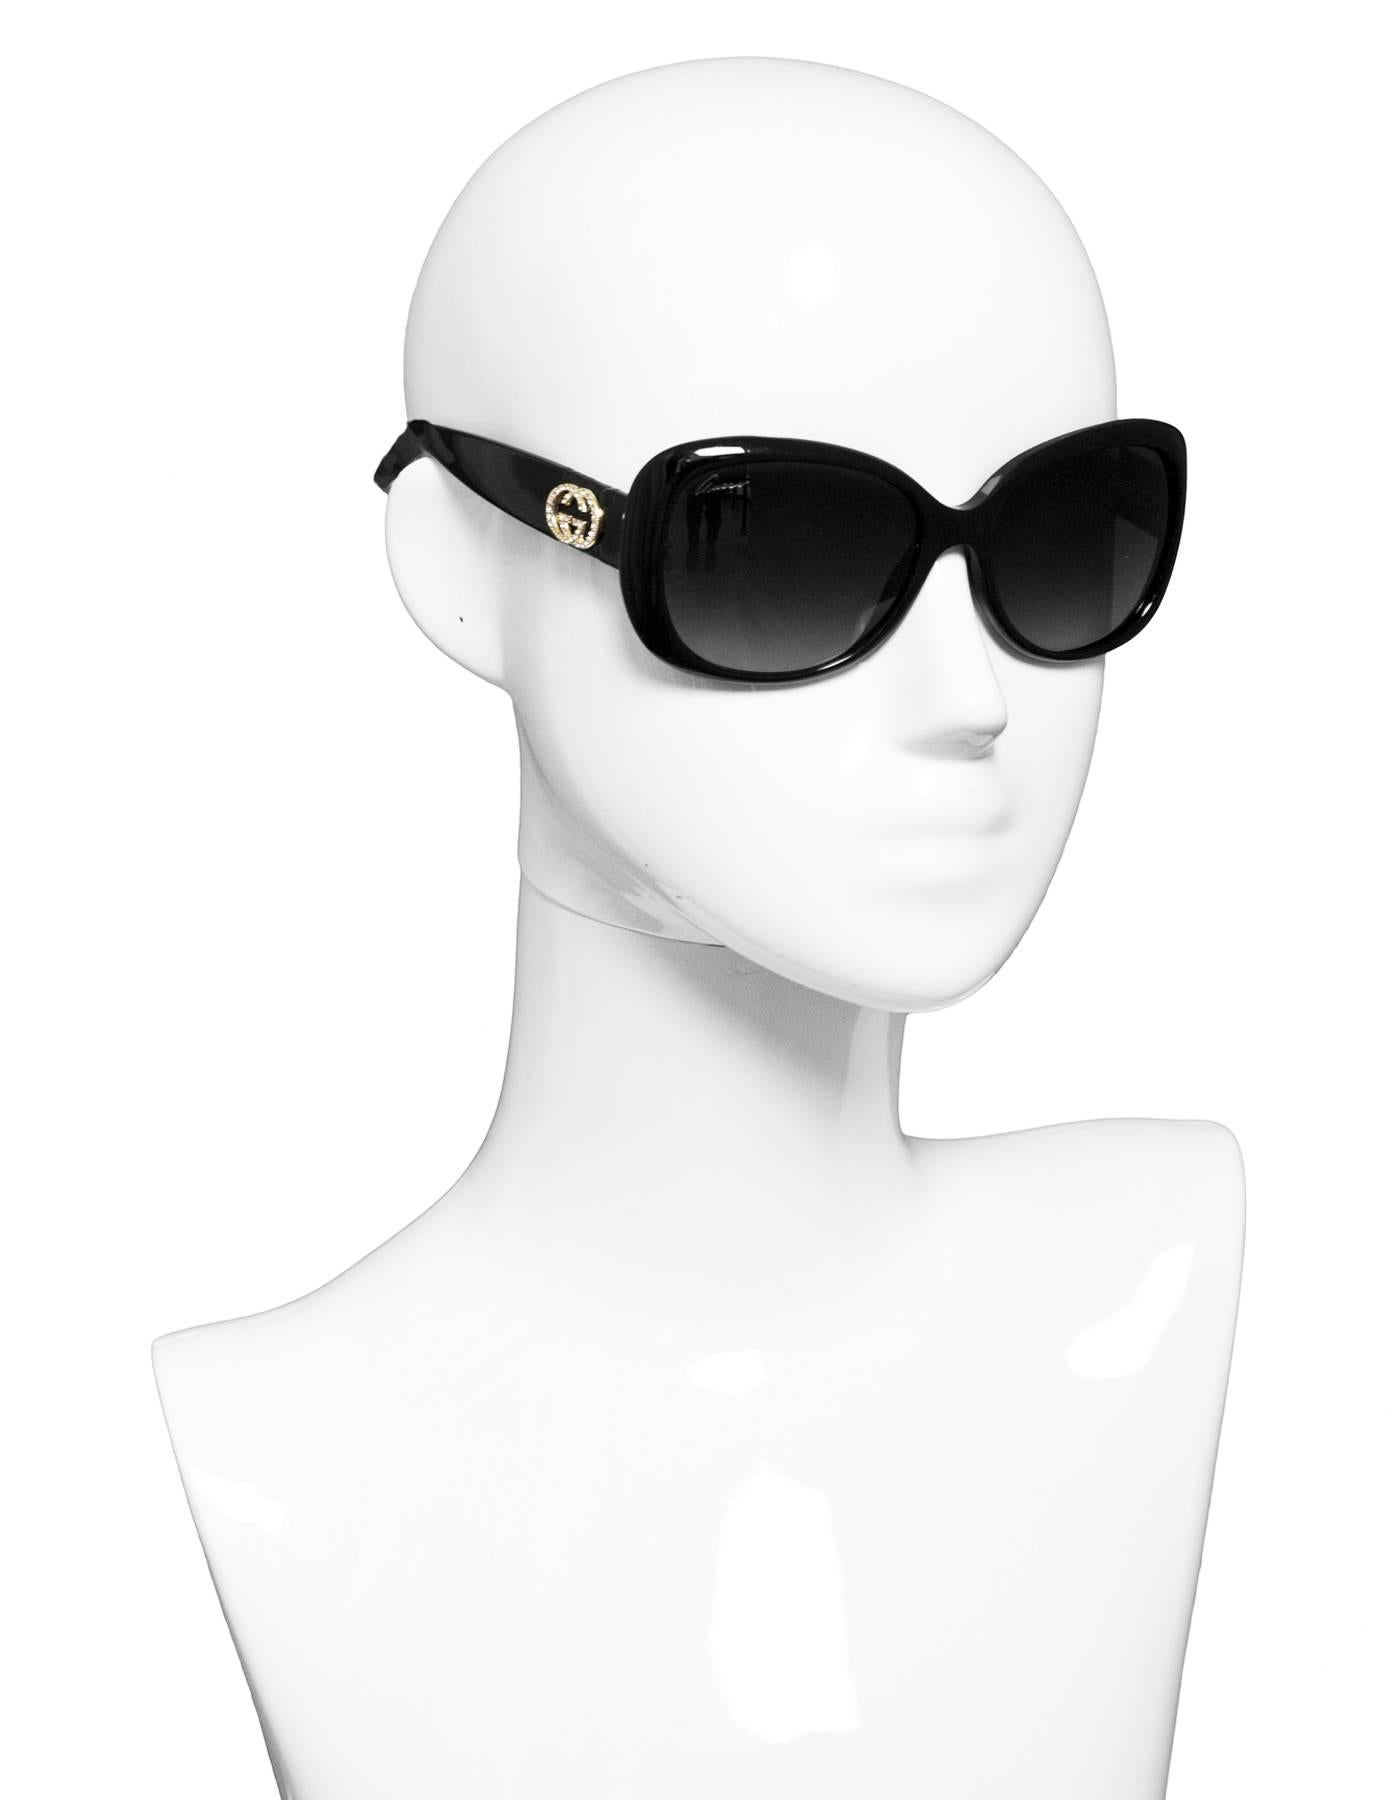 Gucci Black GG Crystal Sunglasses

Made In: Italy
Color: Black, gold
Materials: Resin, metal, crystal
Retail Price: $395 + tax
Overall Condition: Very good pre-owned condition with the exception of light surface marks throughout and loose GG logo at